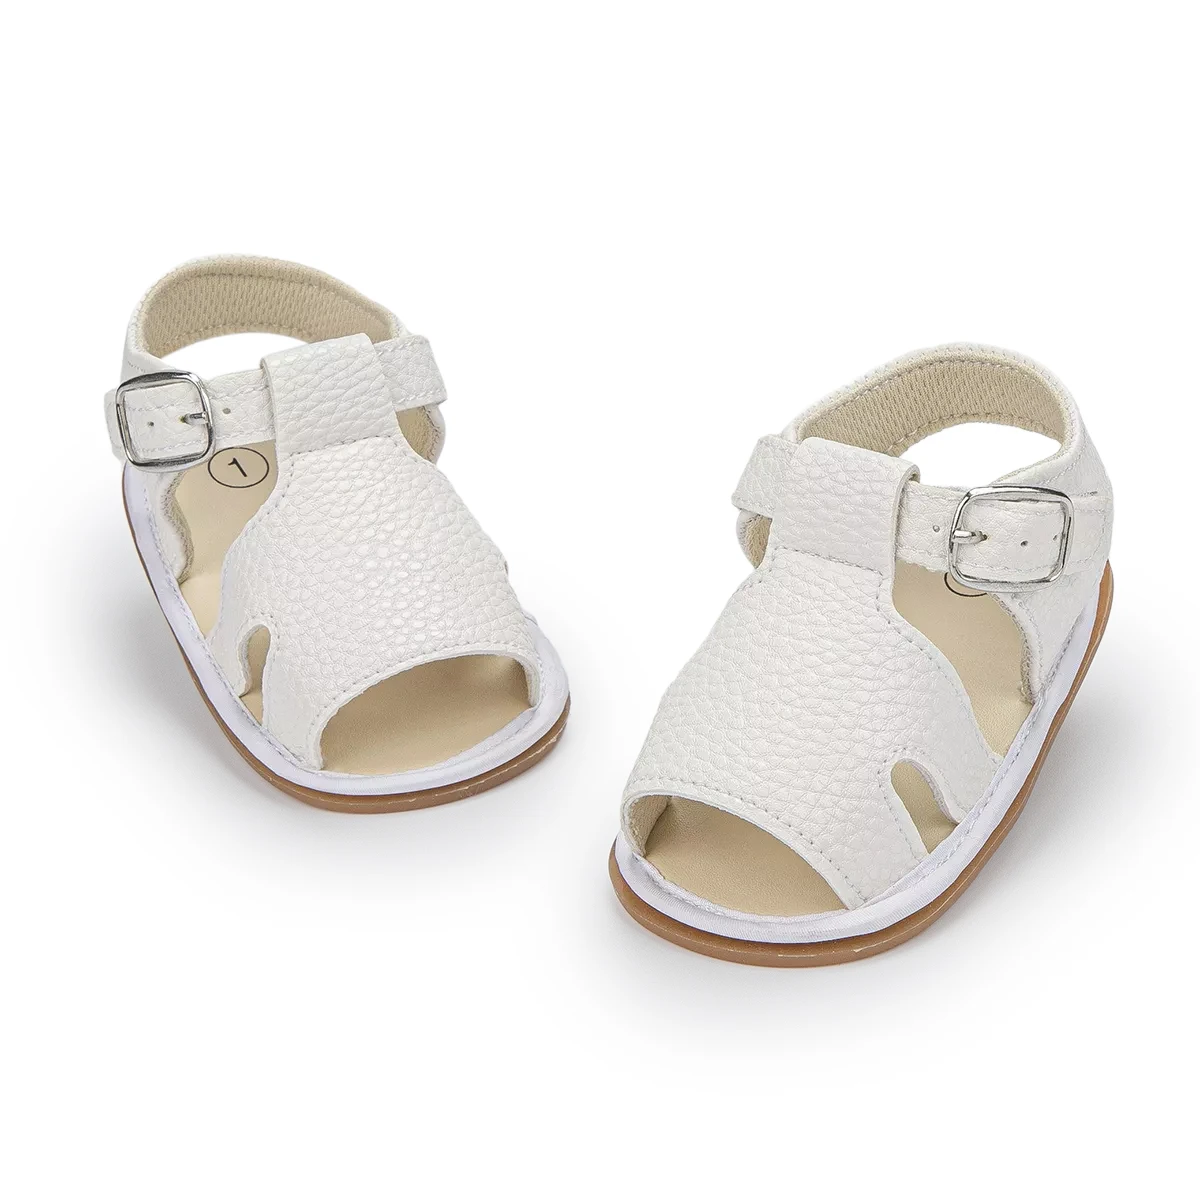 New Fashion PU Leather Rubber Sole Antislip  Easy To Wear 0 18 Months Baby Sandals Shoes